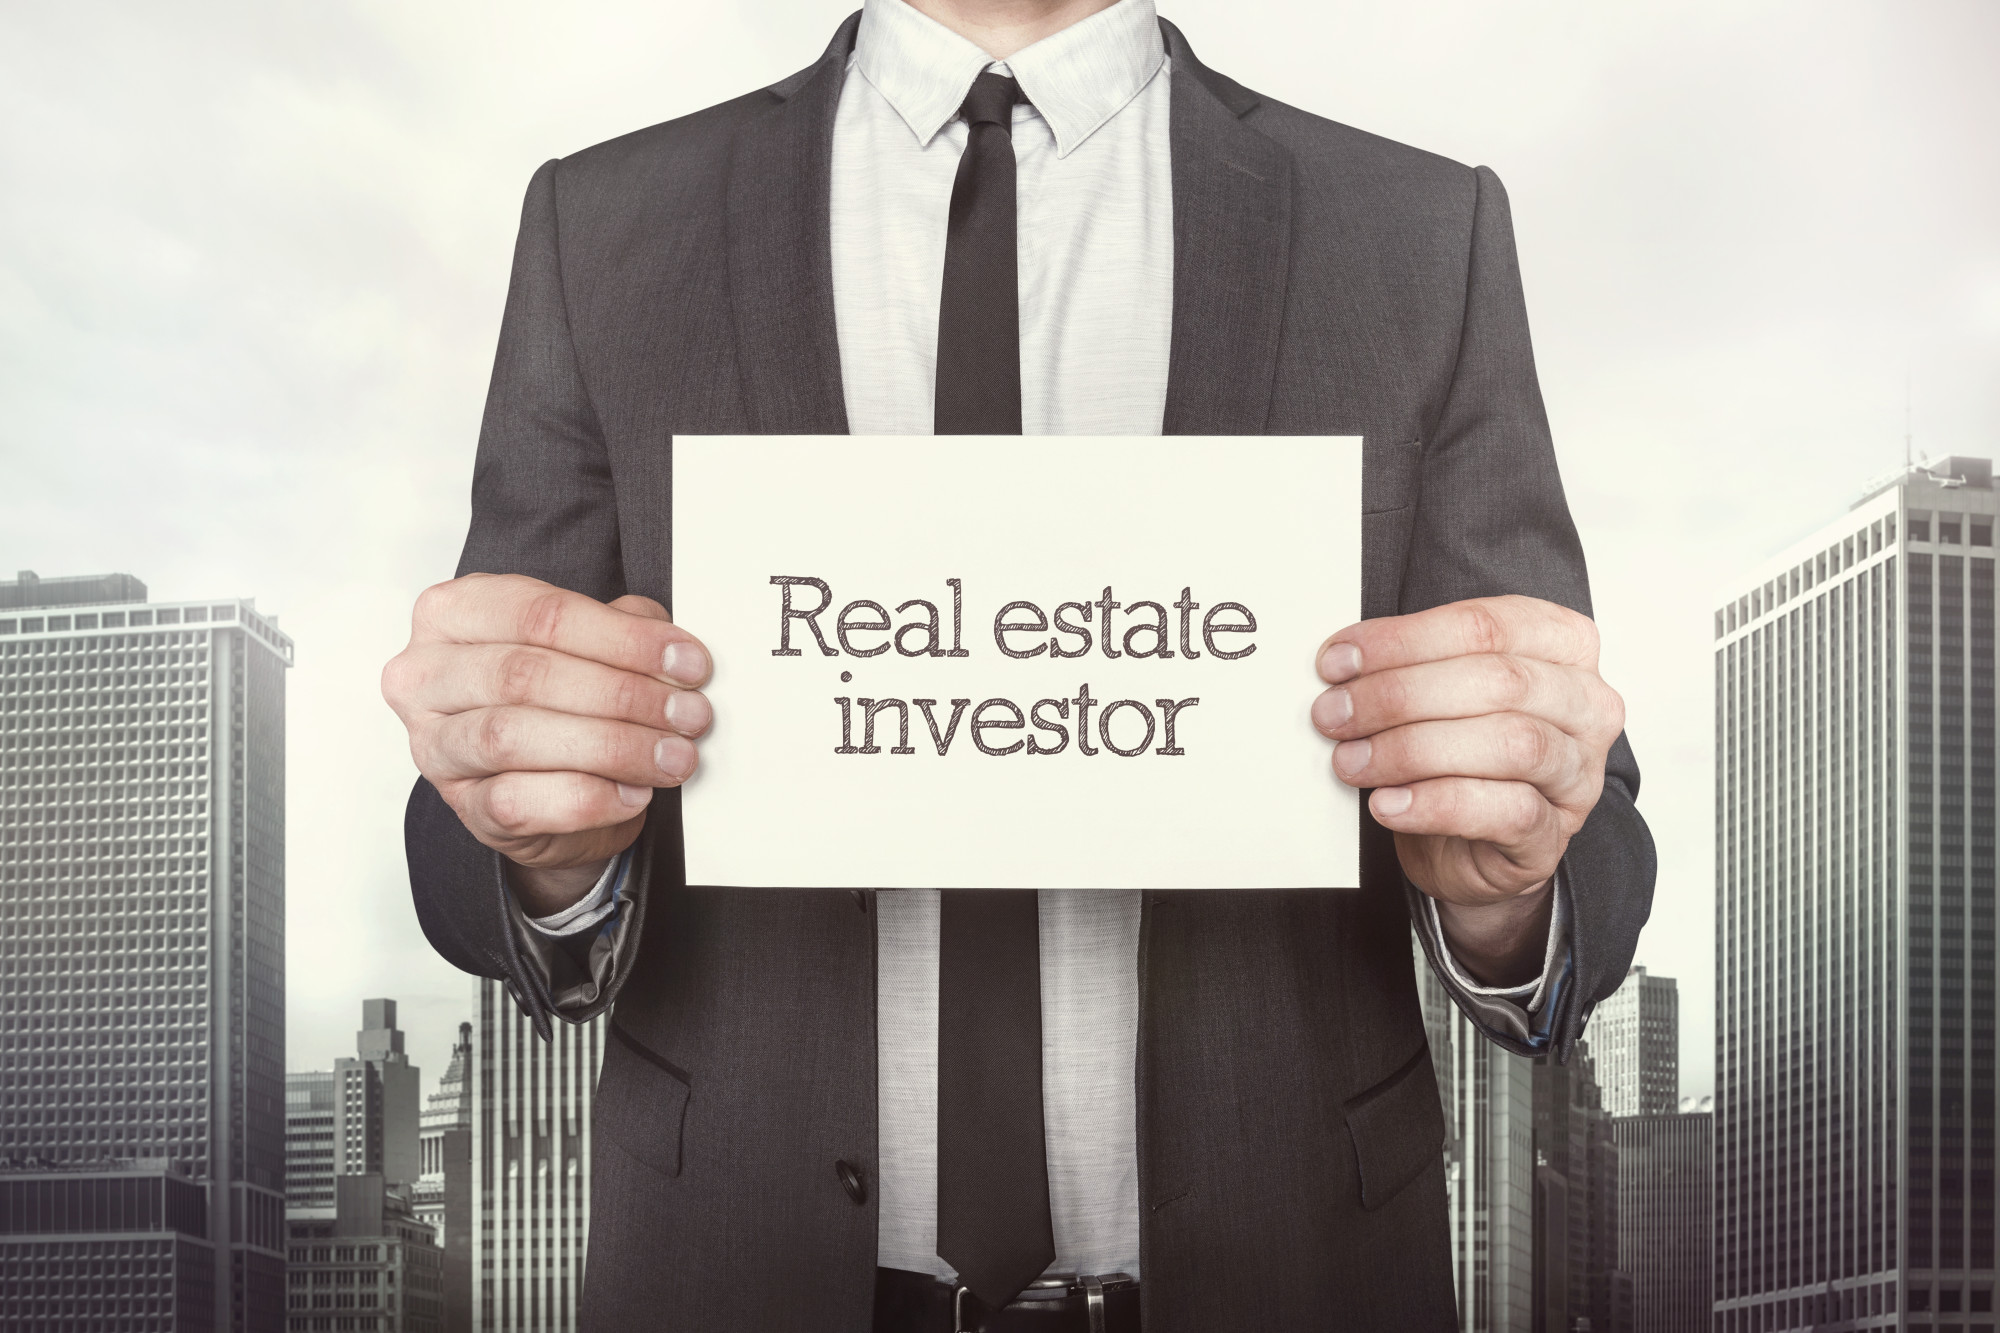 Real estate investor near me: Do you want to know about the benefits of investing in real estate? Read on to learn more about them.